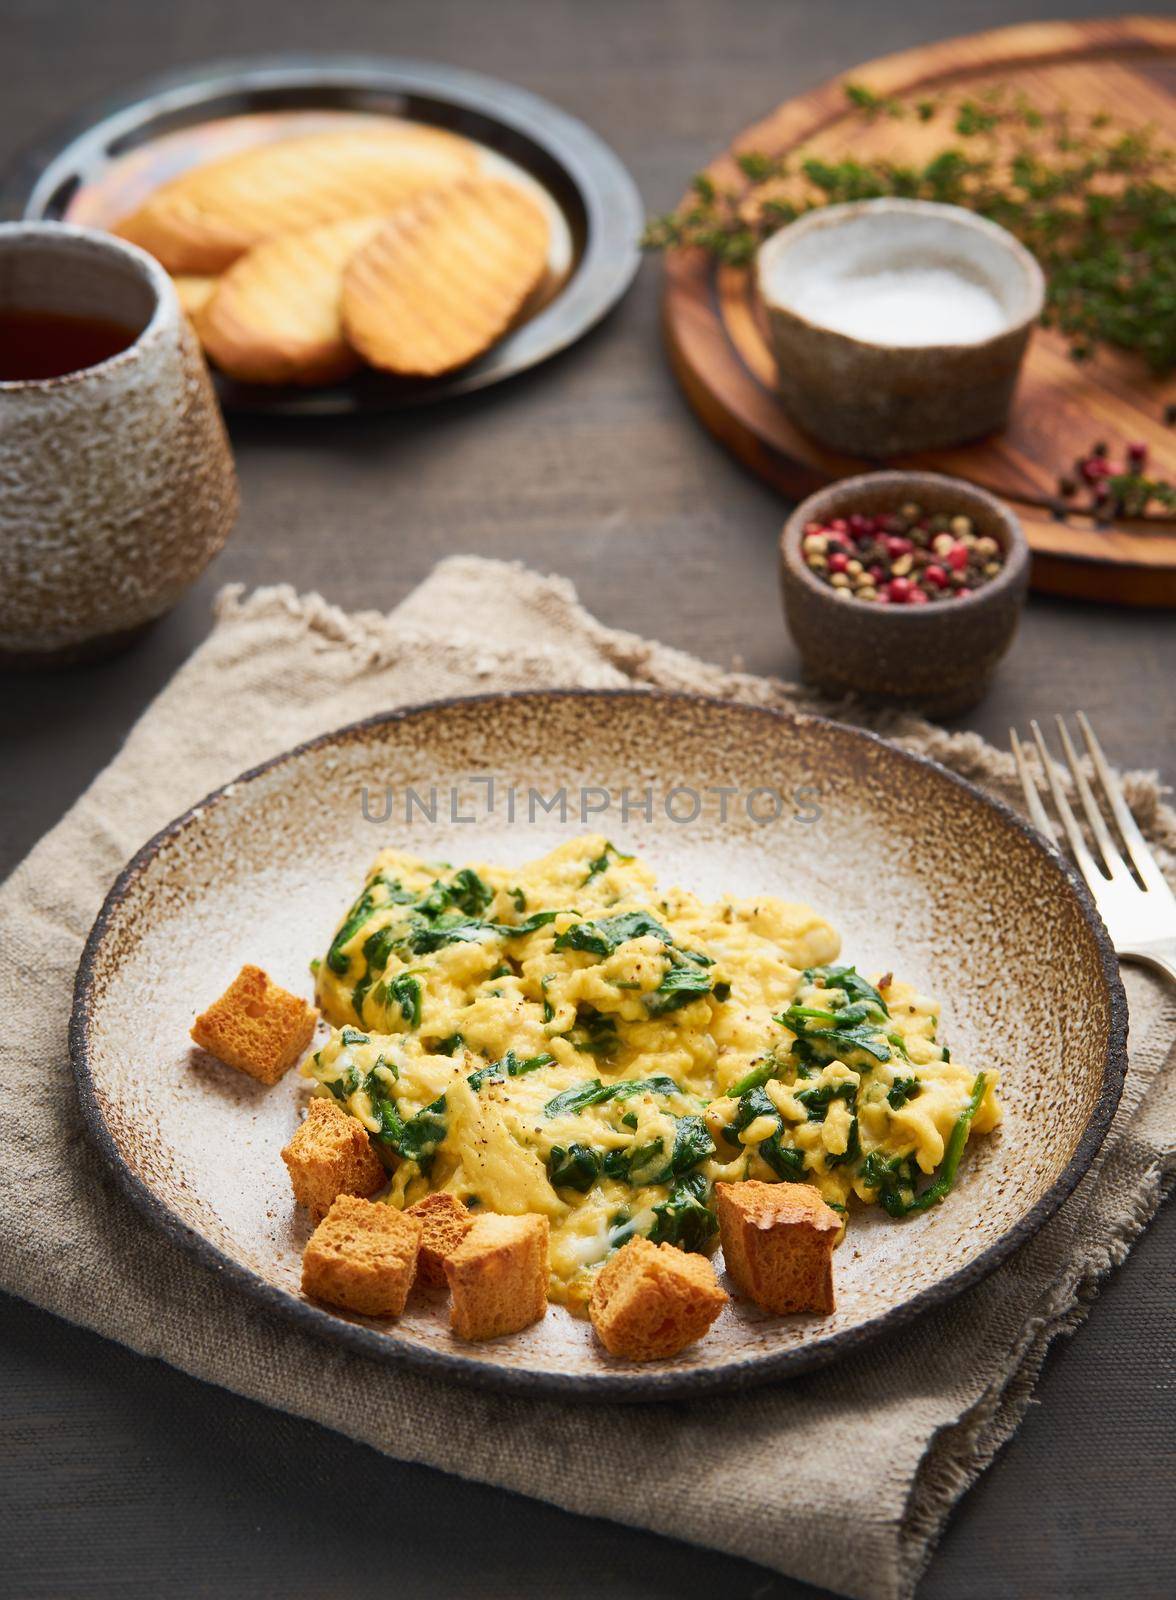 Scrambled eggs with spinach, cup of tea by NataBene